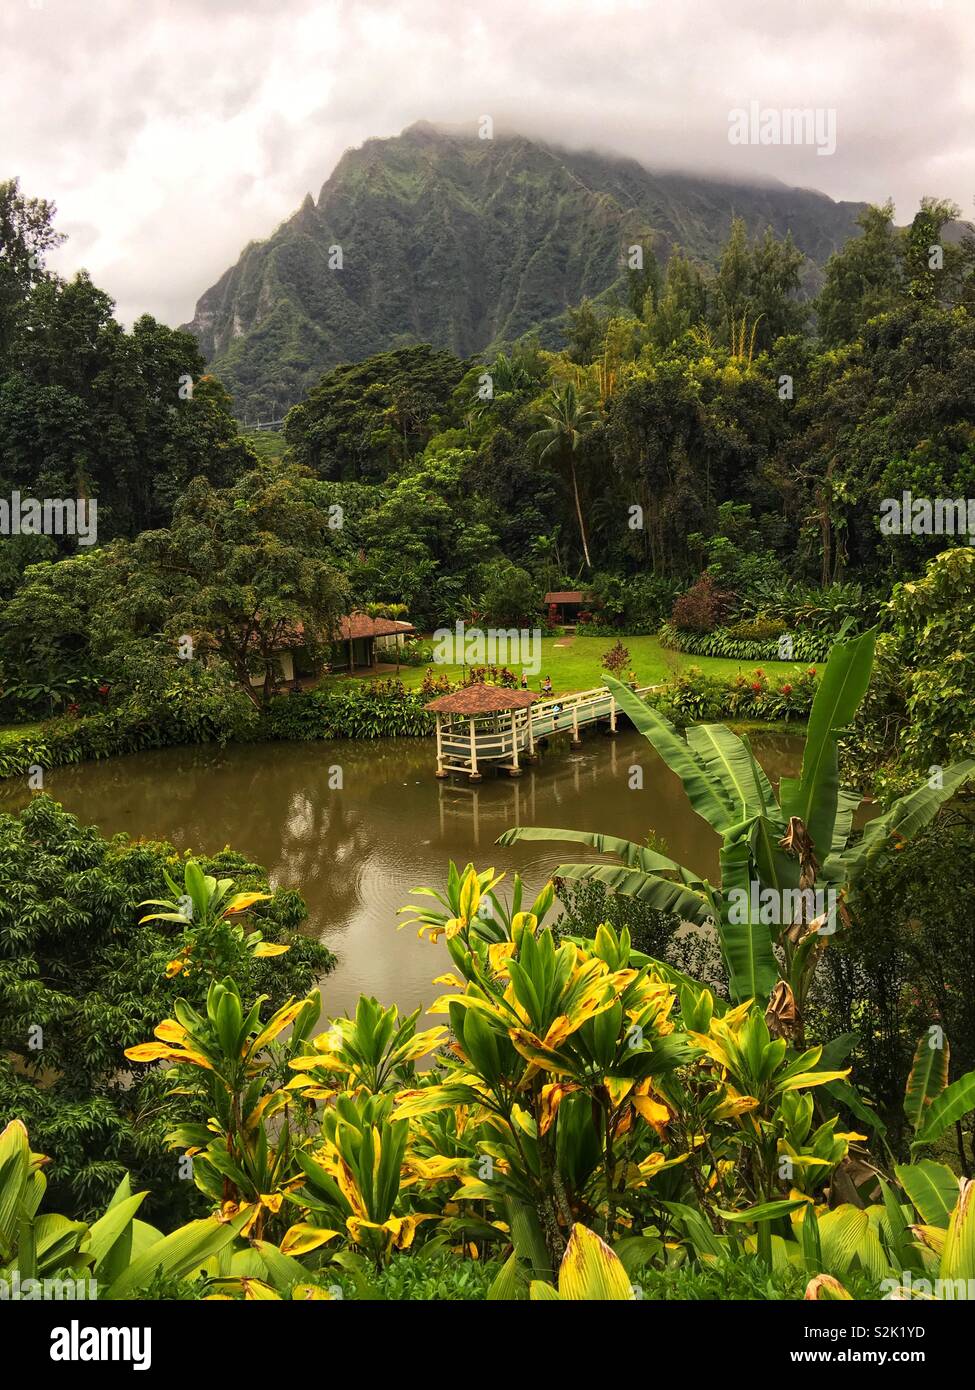 View of Stairway to Heaven Trail in Kaneohe, Hawaii also known as Haʻikū Stairs or Haʻikū Ladder as seen from Haiku Gardens. Stock Photo